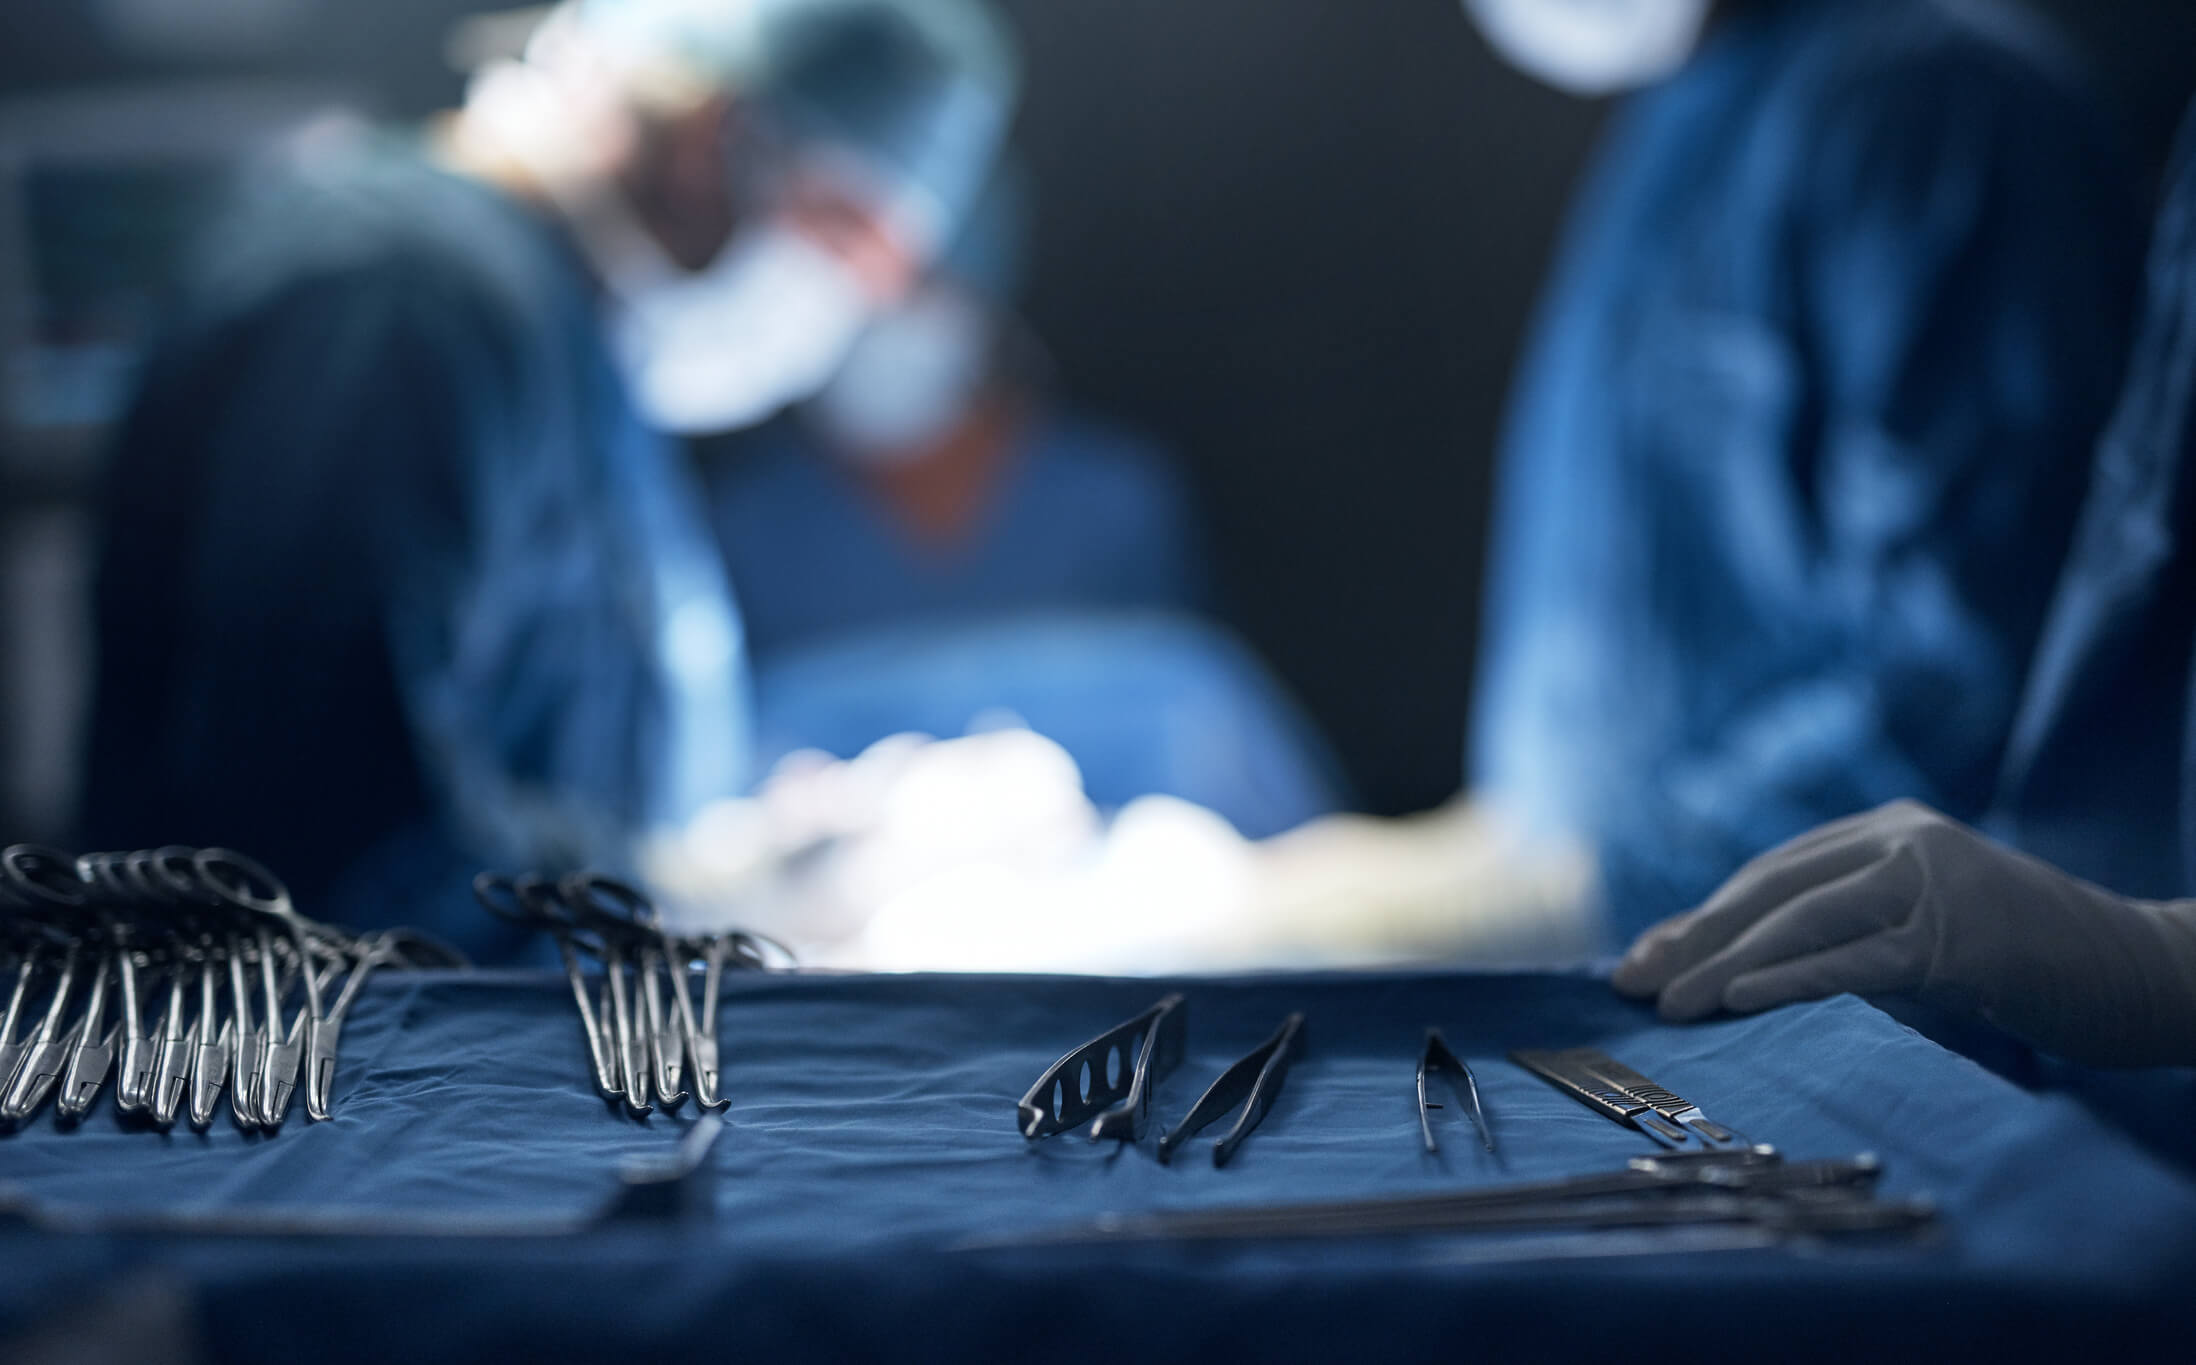 Cooper Schall & Levy discusses complications caused by retained surgical instruments.